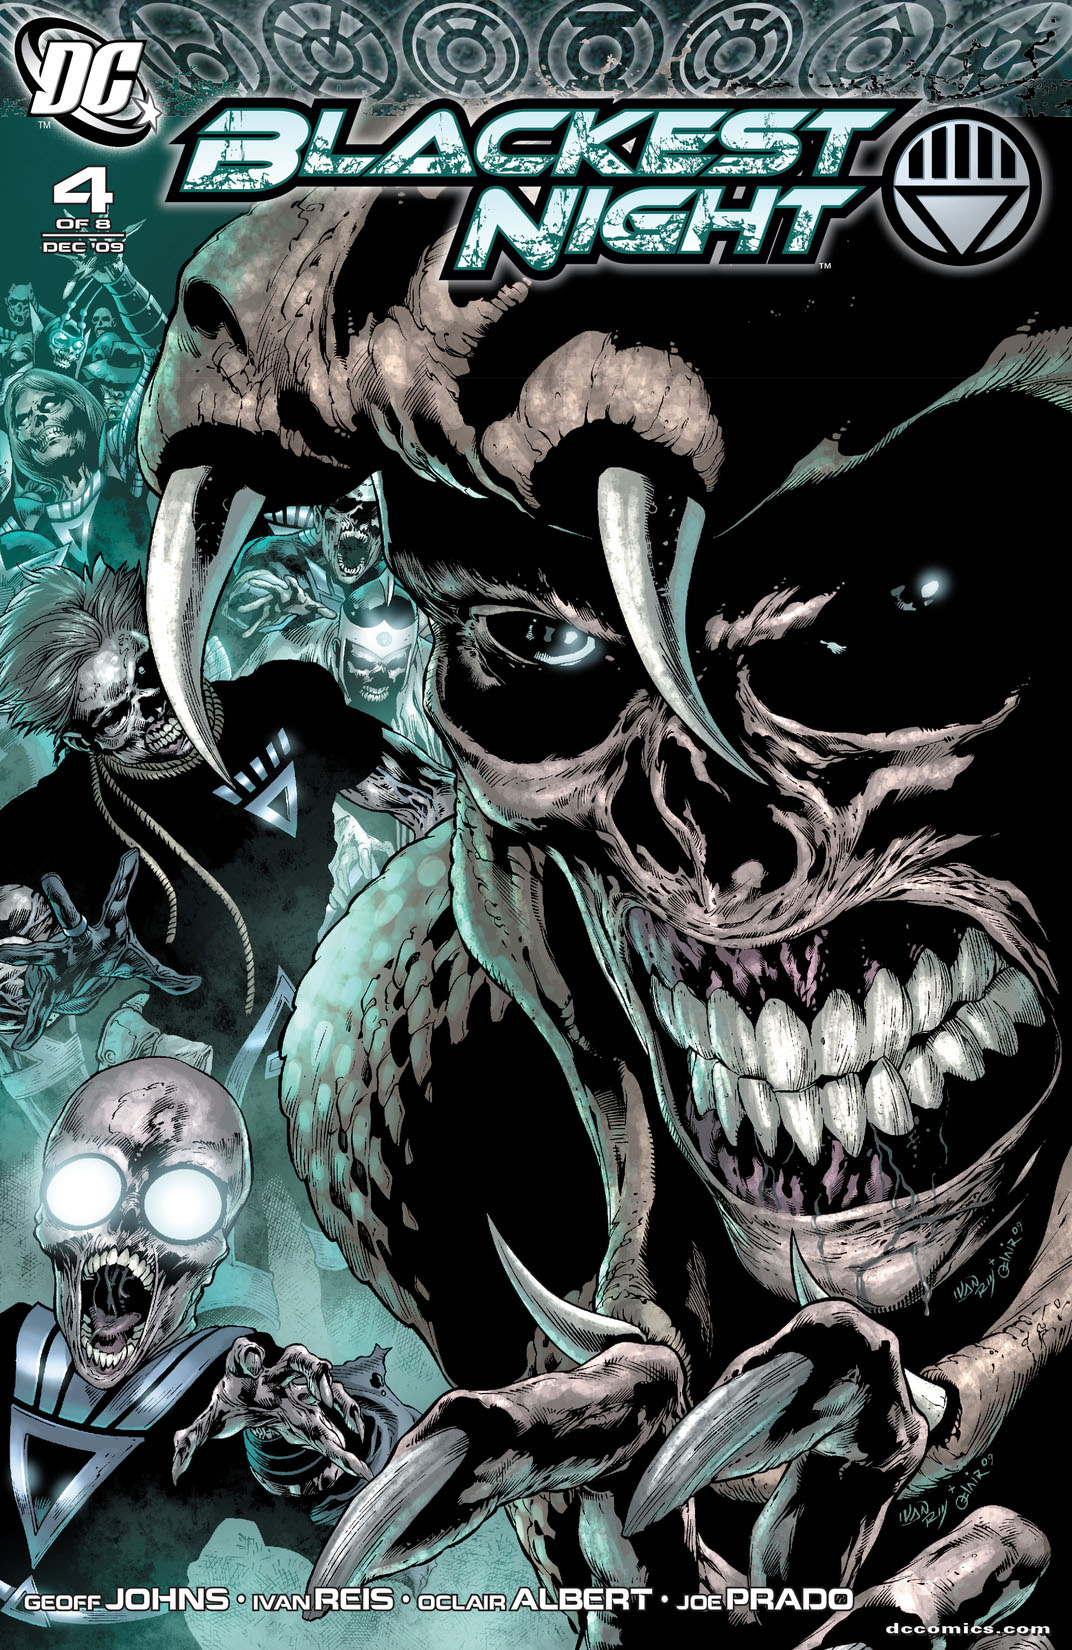 Blackest Night #4 preview images